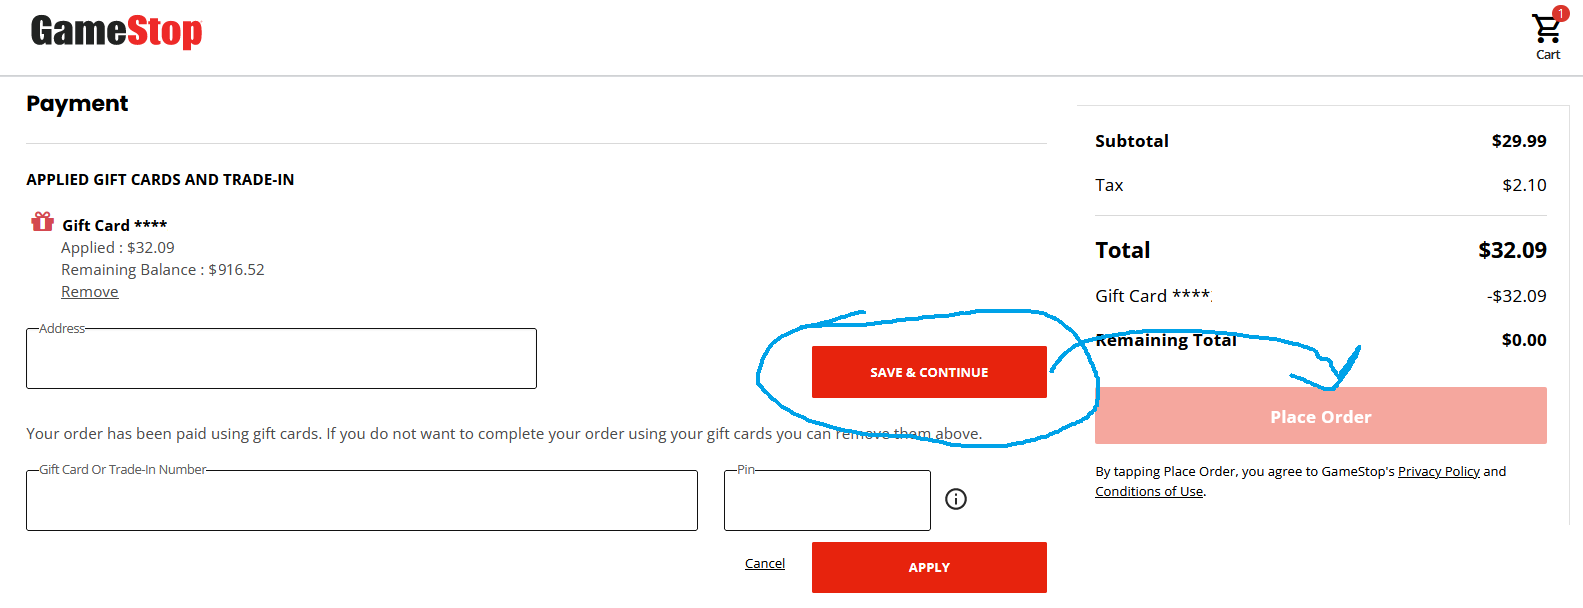 ✓ How To Check GameStop Gift Card Balance Online 🔴 